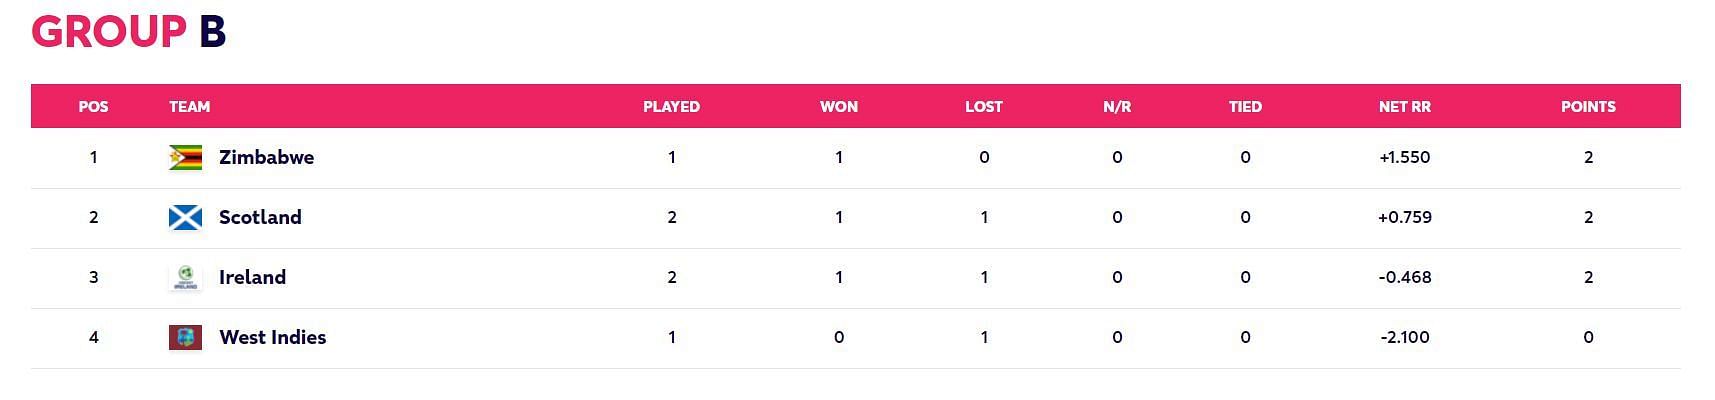 Updated Points Table after Match 7 (Image Courtesy: www.t20worldcup.com)